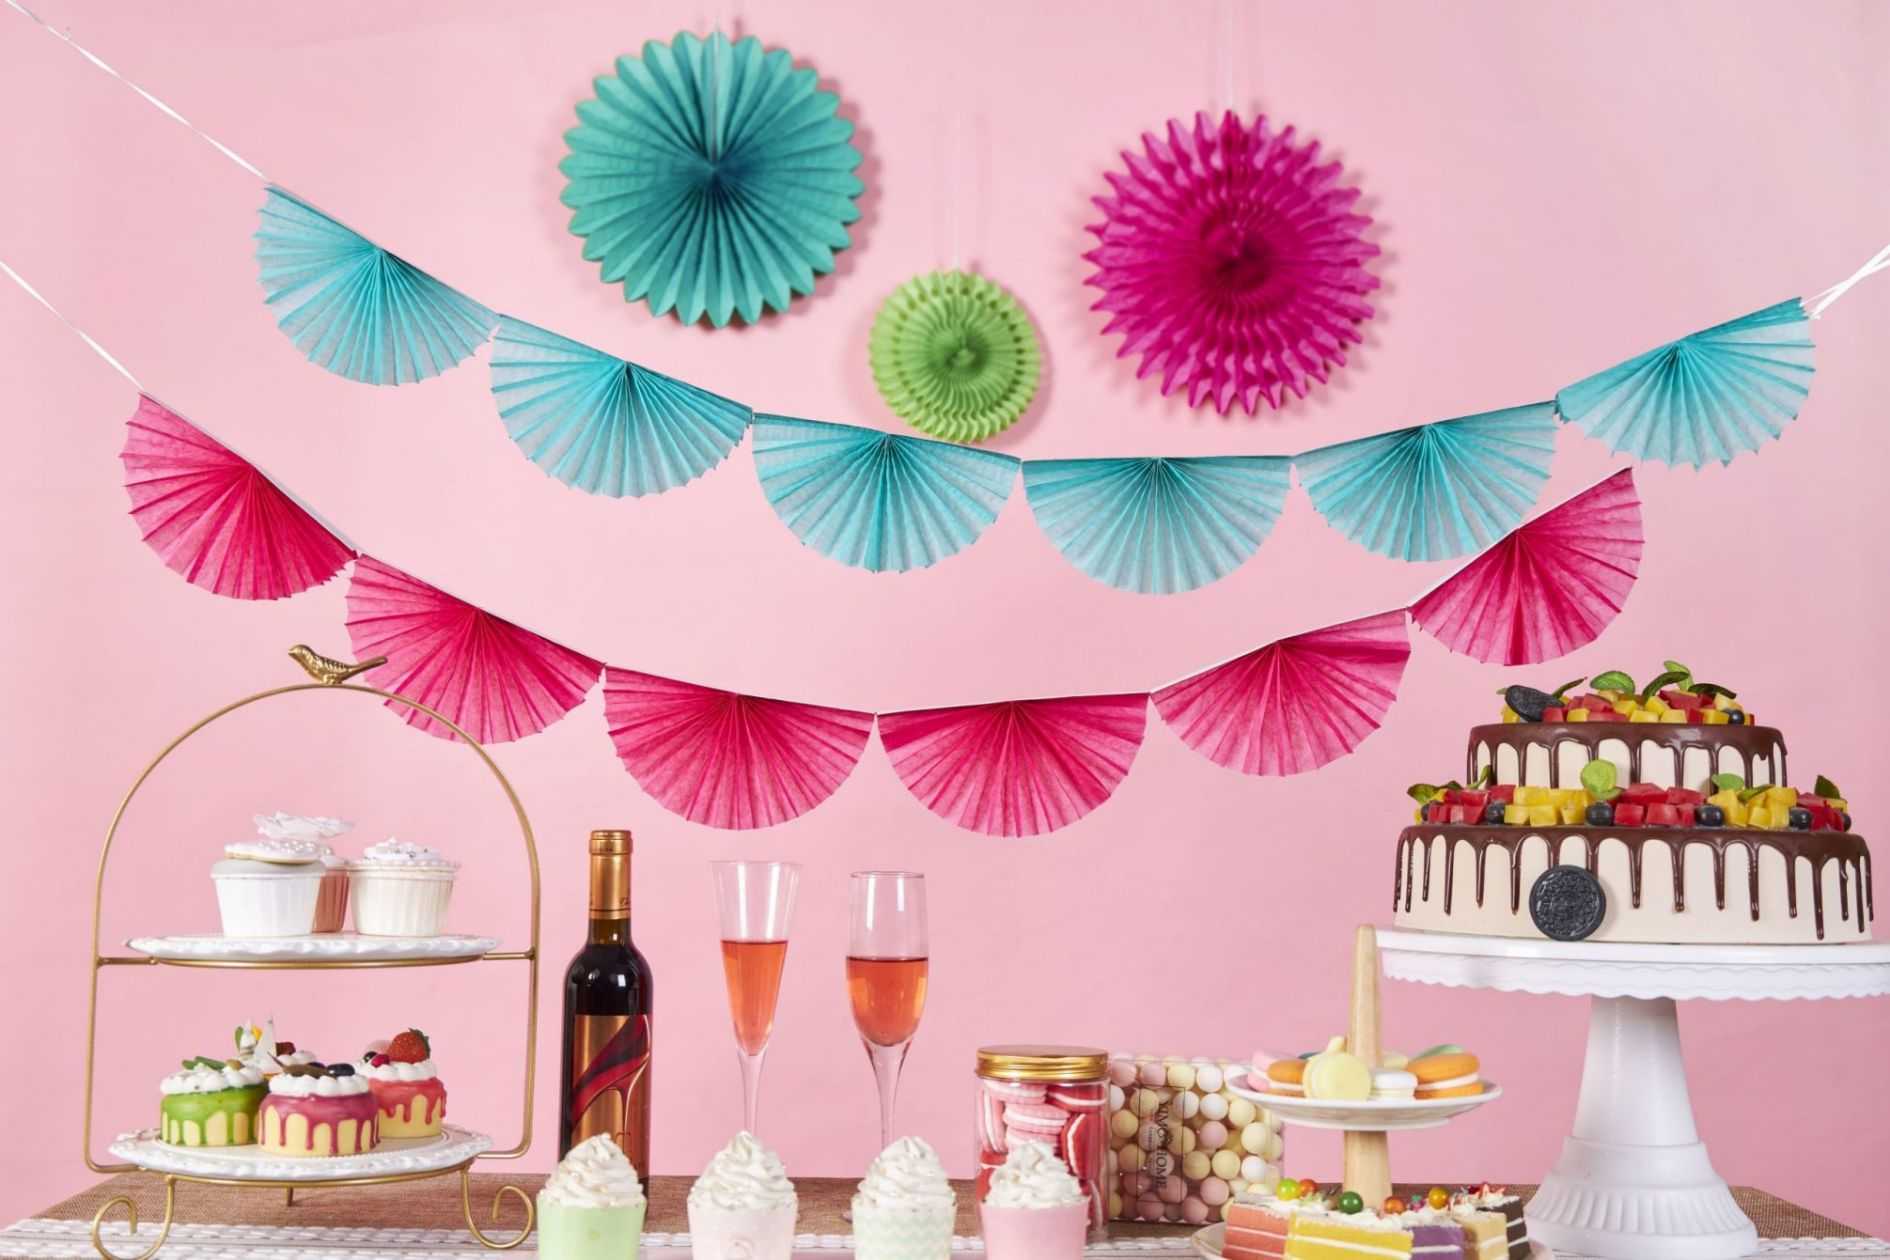 Party Decorations Paper Garlands treamers (Starting from $0.15)